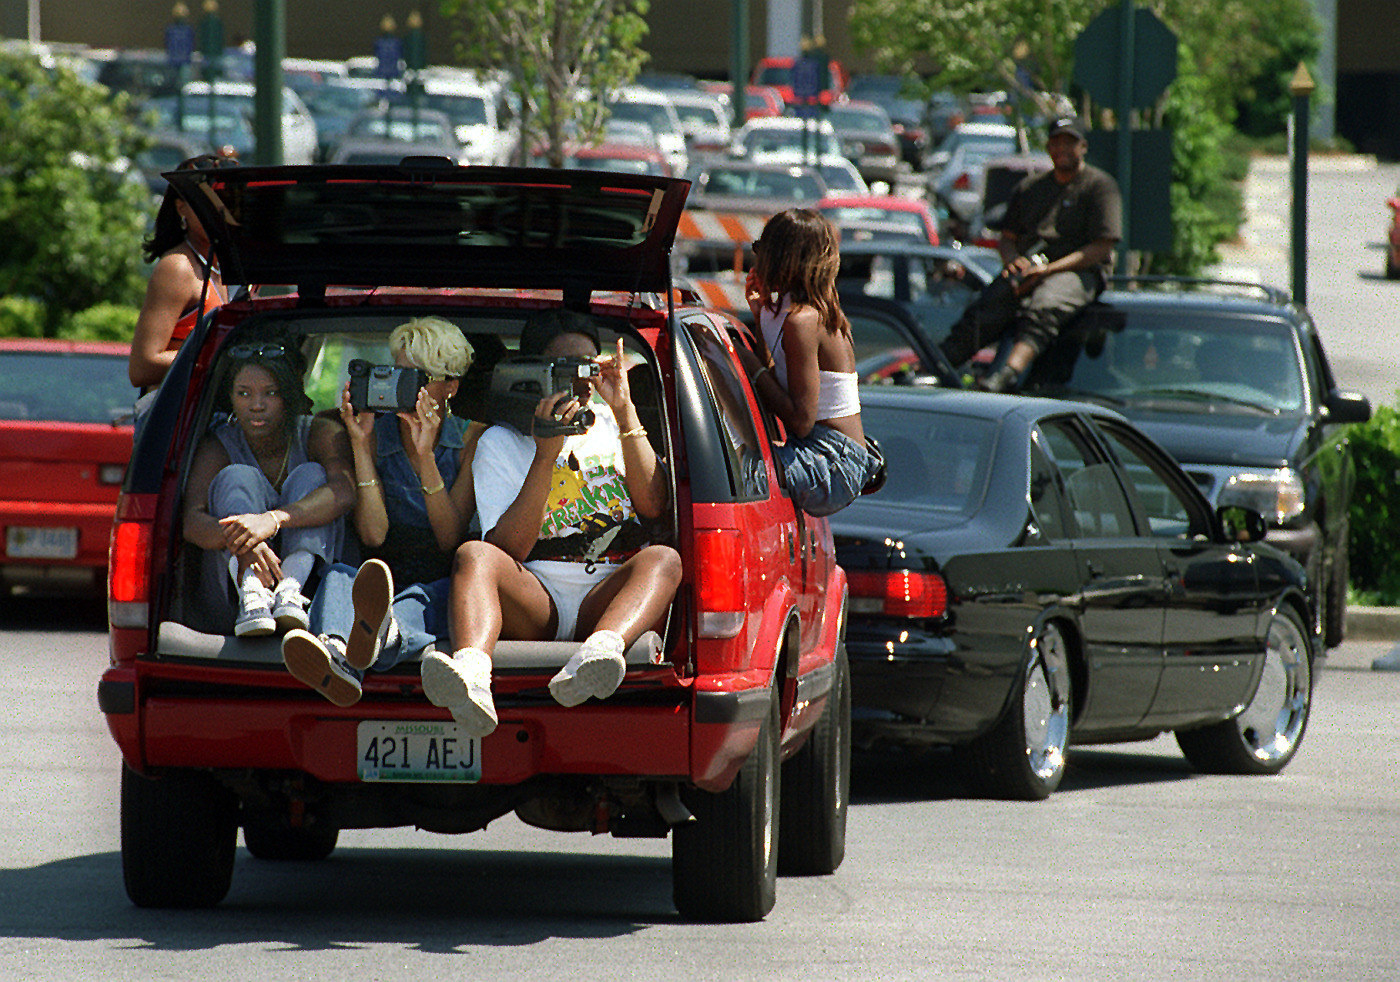 three women sit in the back of a car with the trunk open and videotape the scene, two other women are hanging out the windows